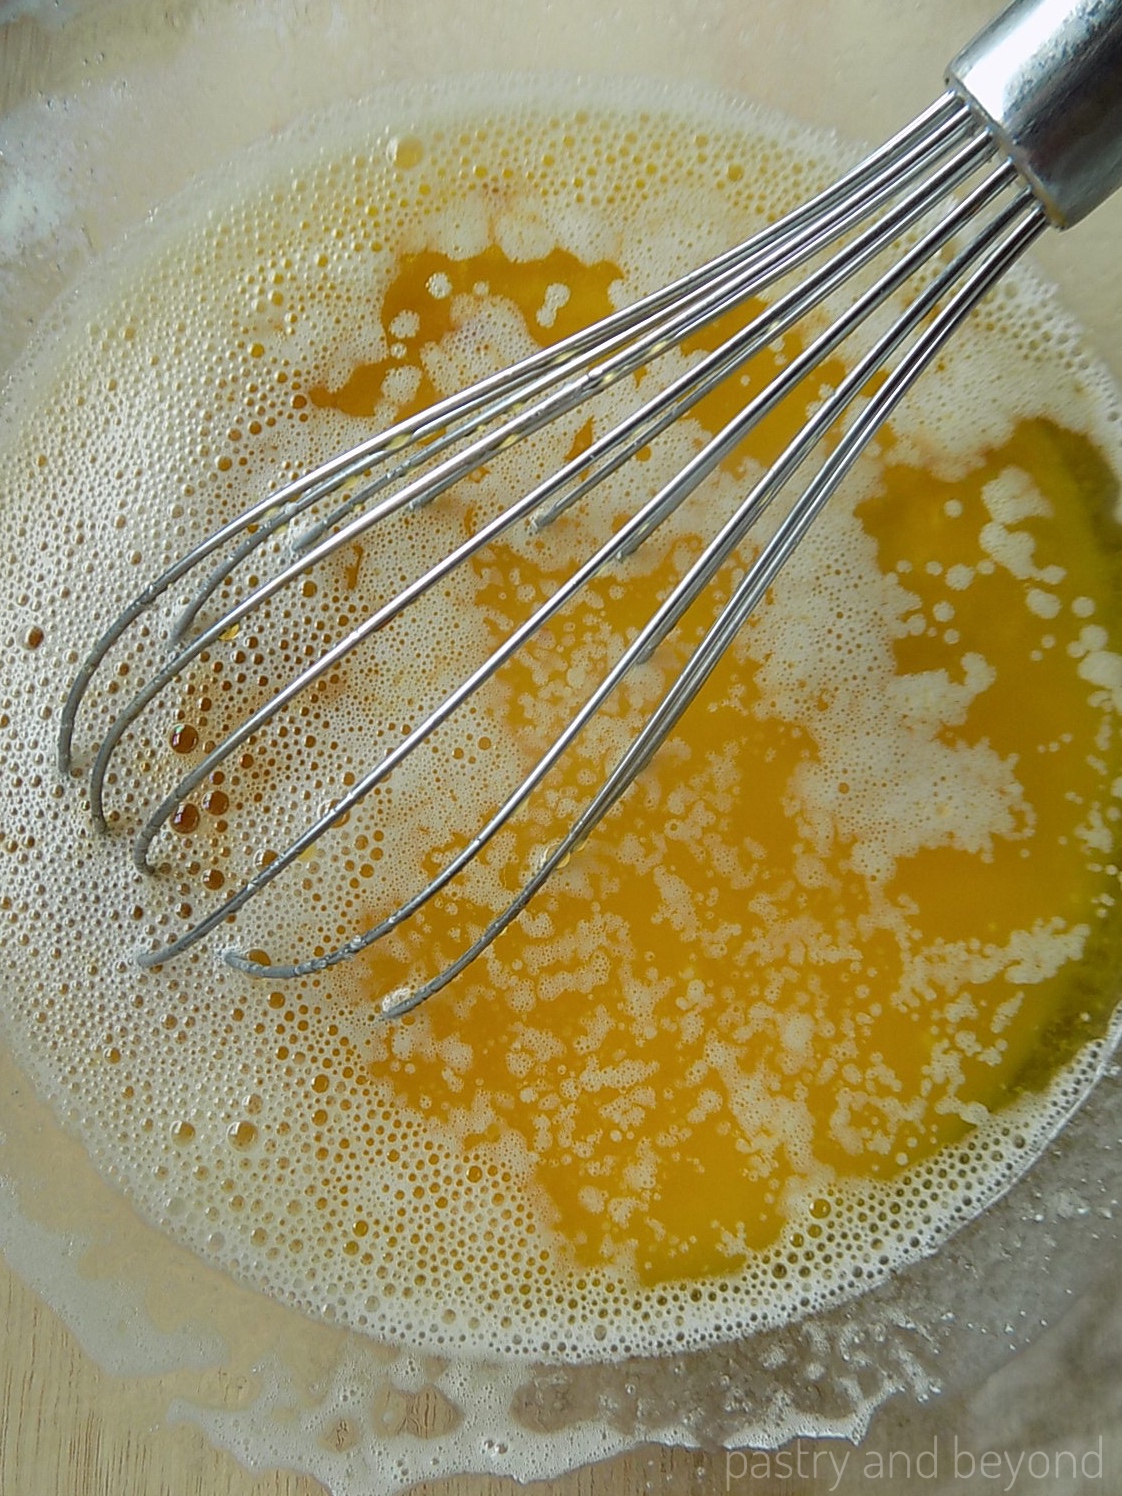 Olive oil, melted butter and vanilla extract are added into the egg mixture.